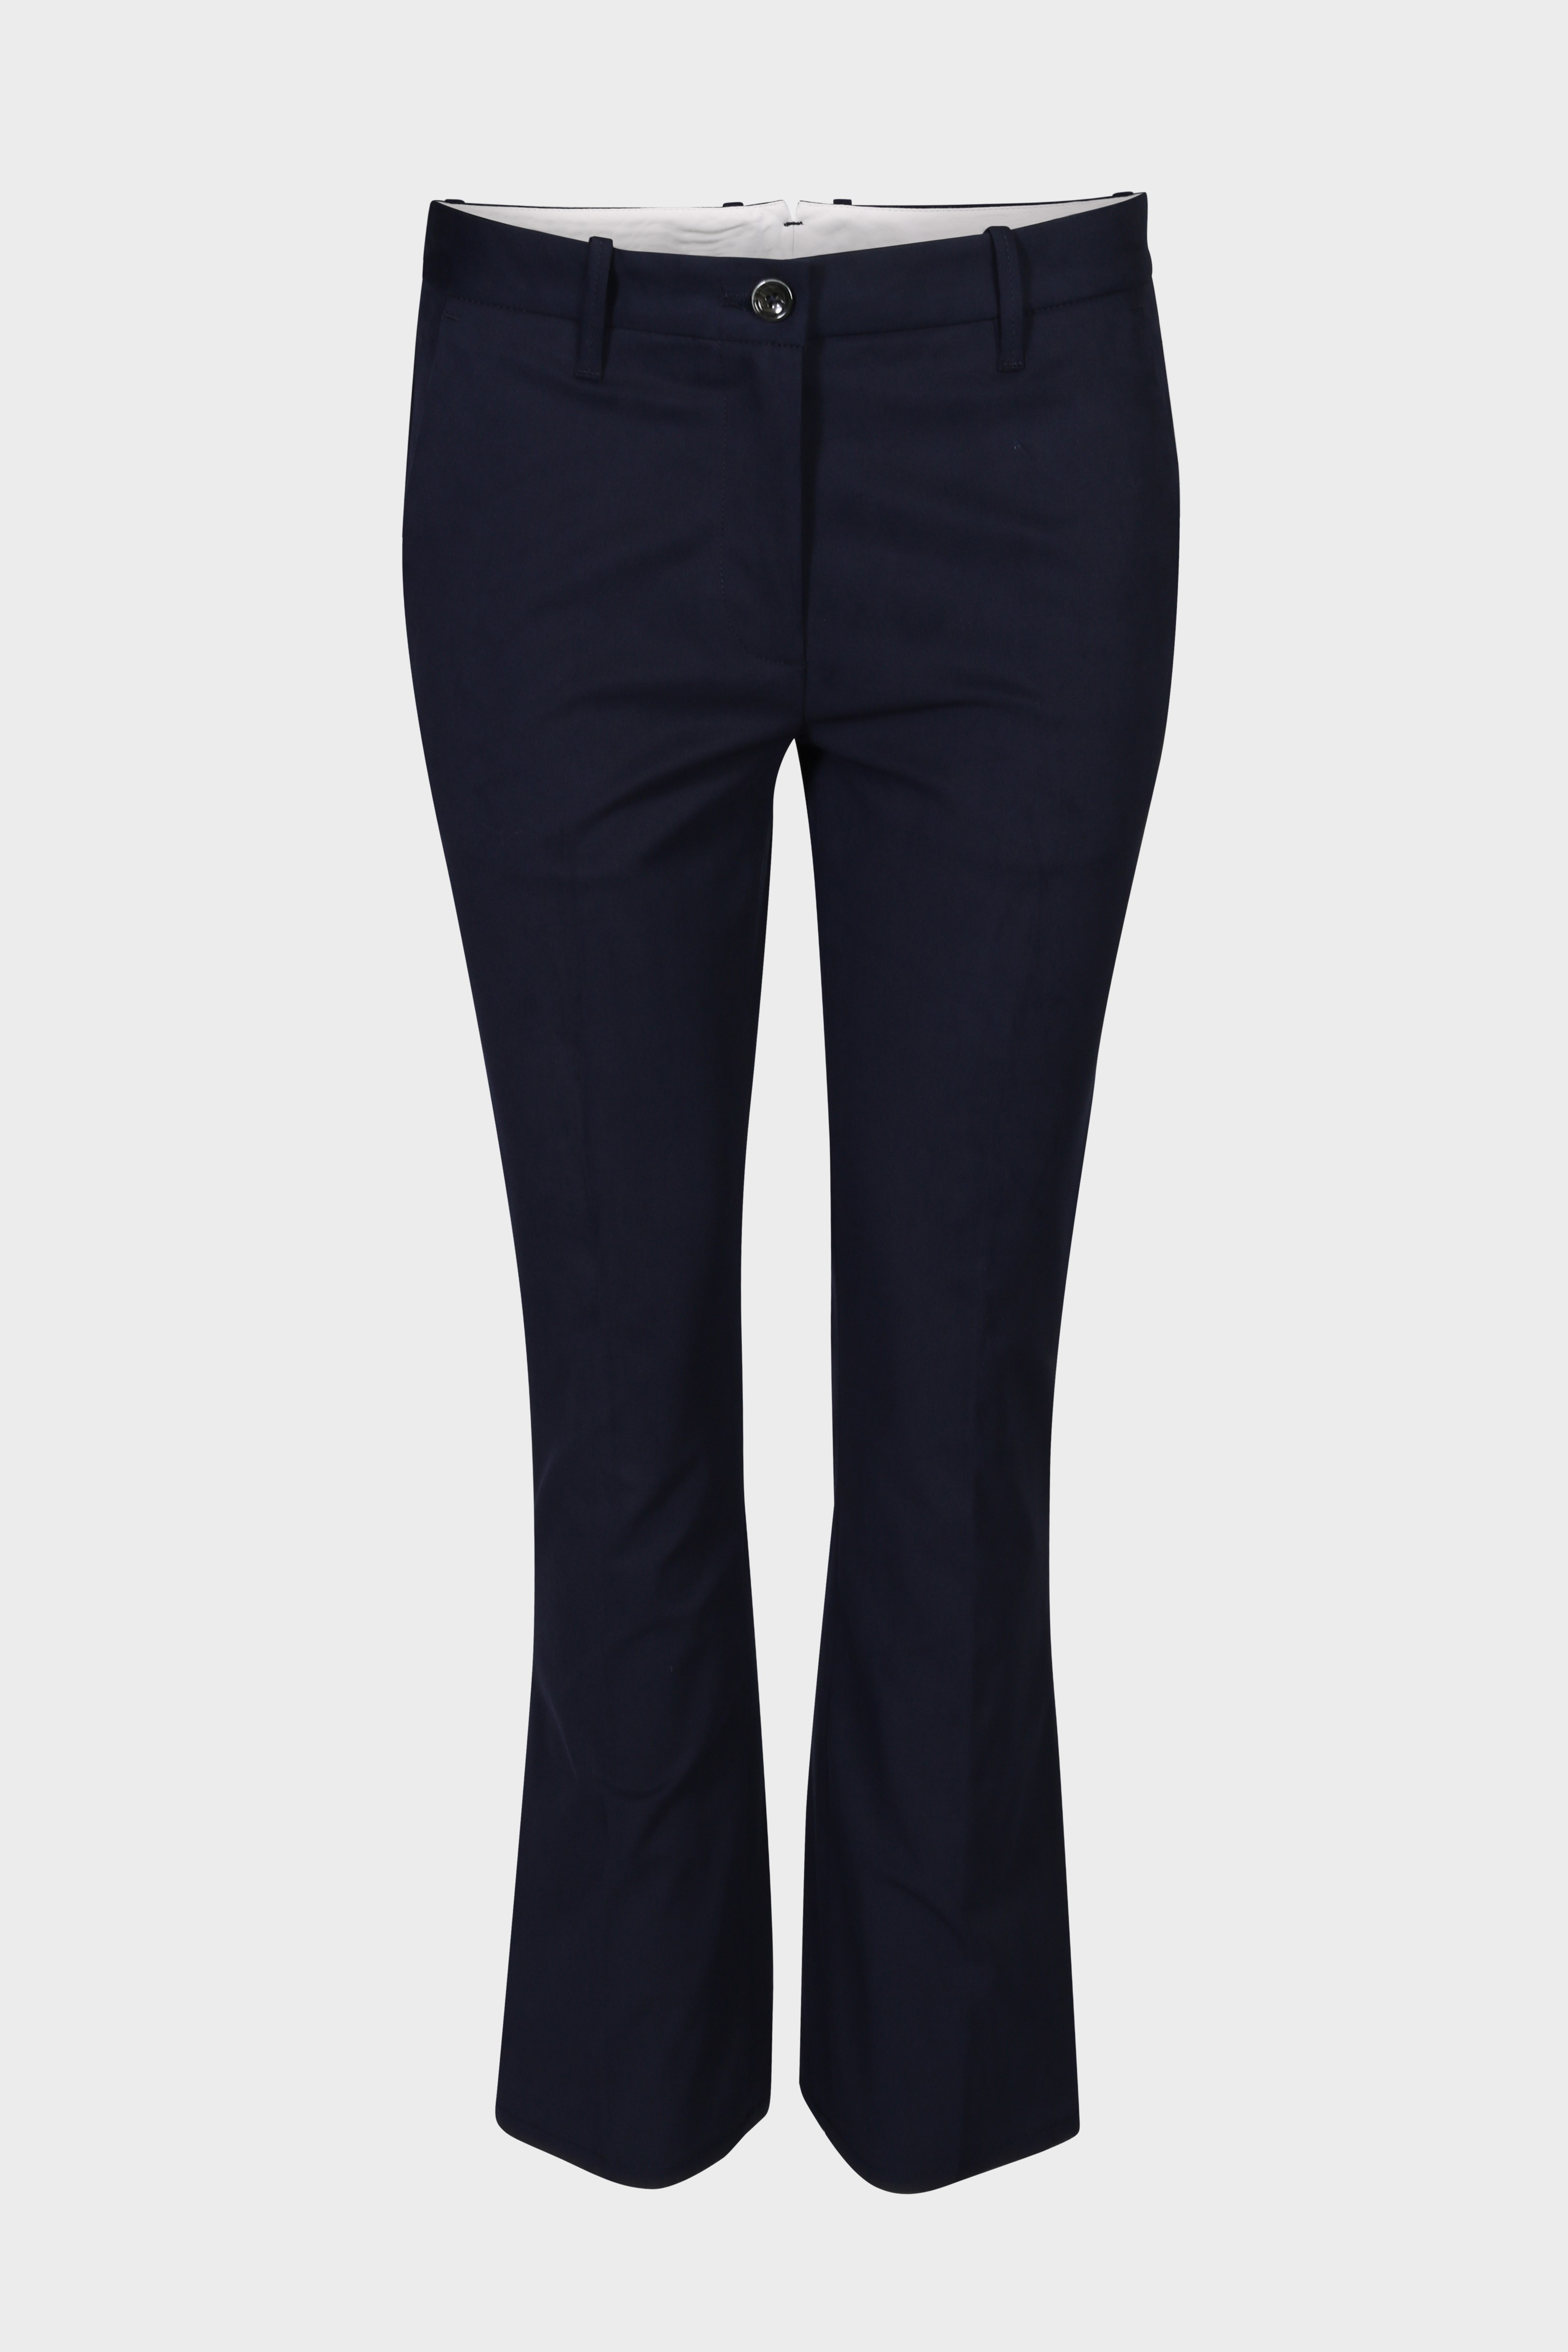 NINE:INTHE:MORNING Rome Trumpet Pant in Blue Navy